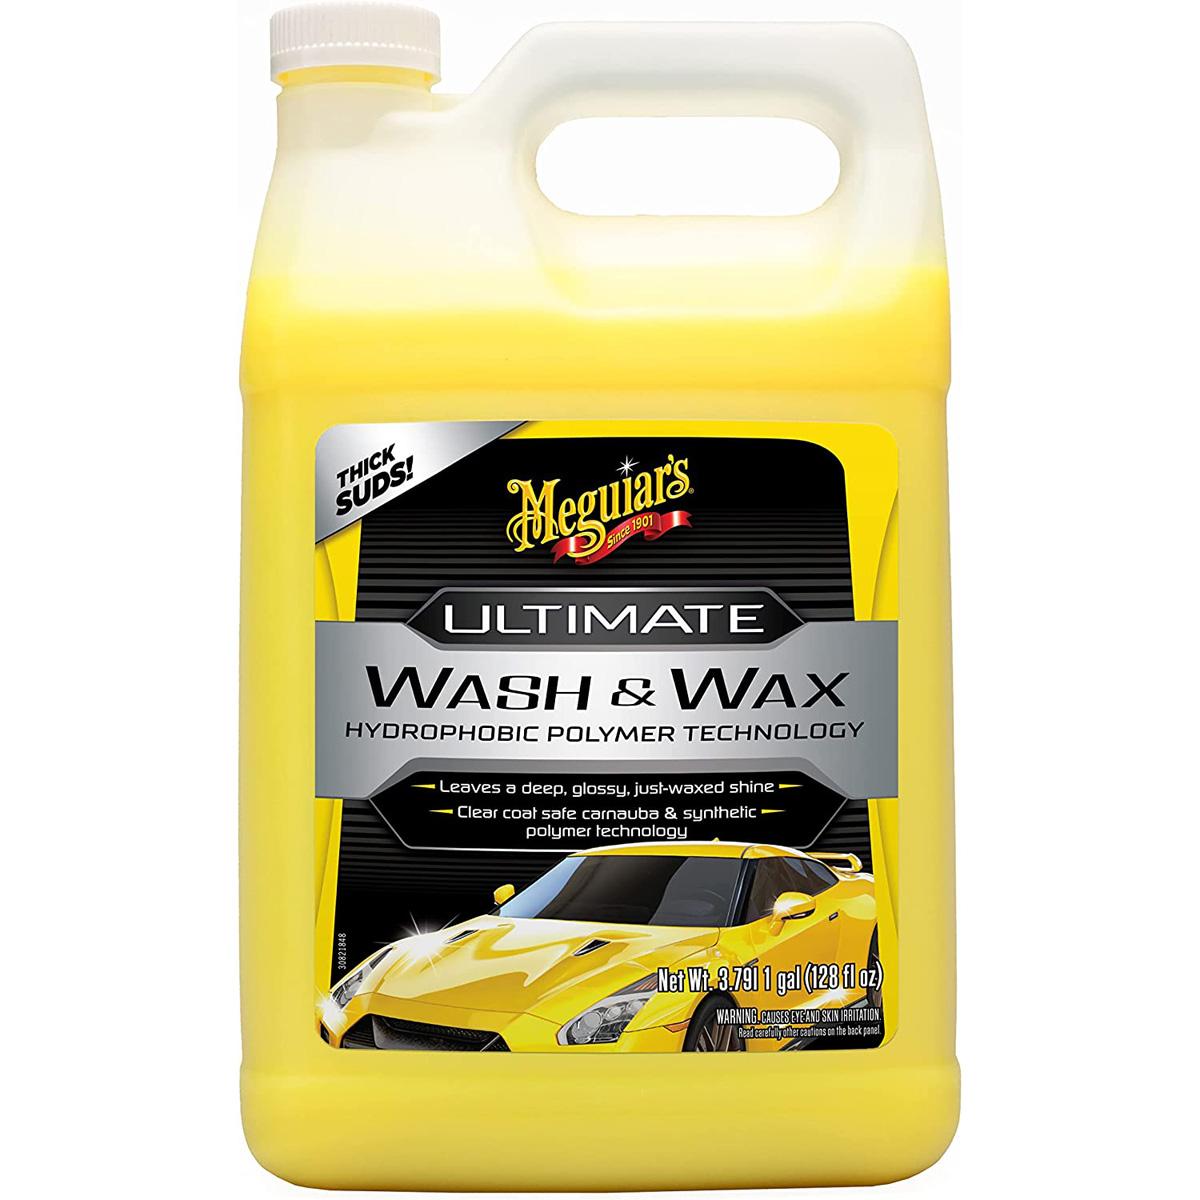 Meguiars Ultimate Wash and Wax for $19.47 Shipped